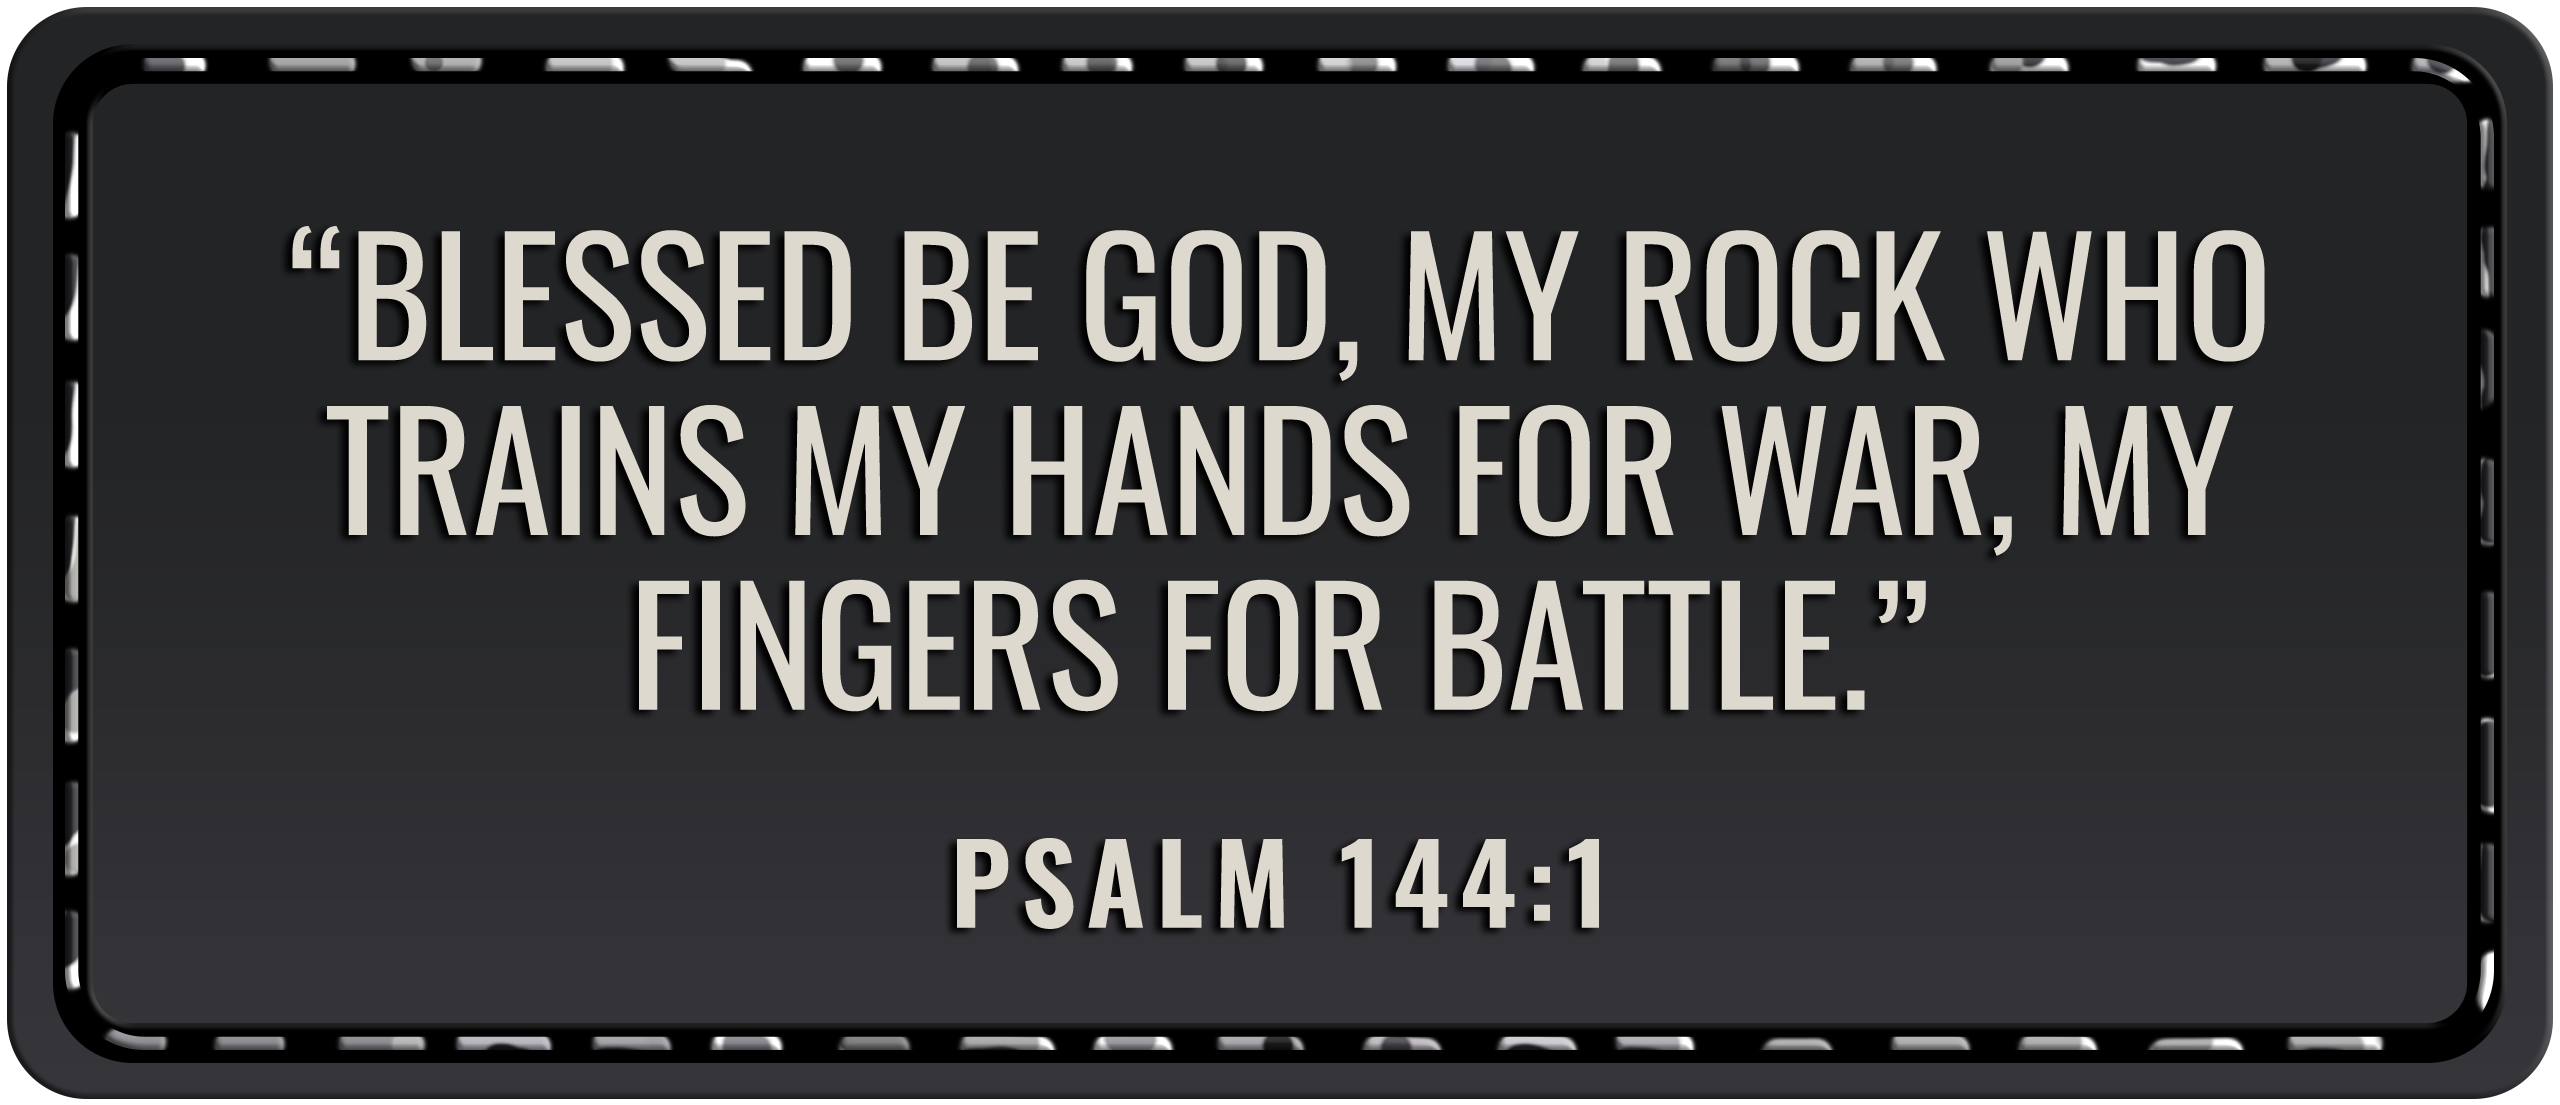 Blessed be God, my rock who trains my hands for war, my fingers for battle. Psalm 144:1